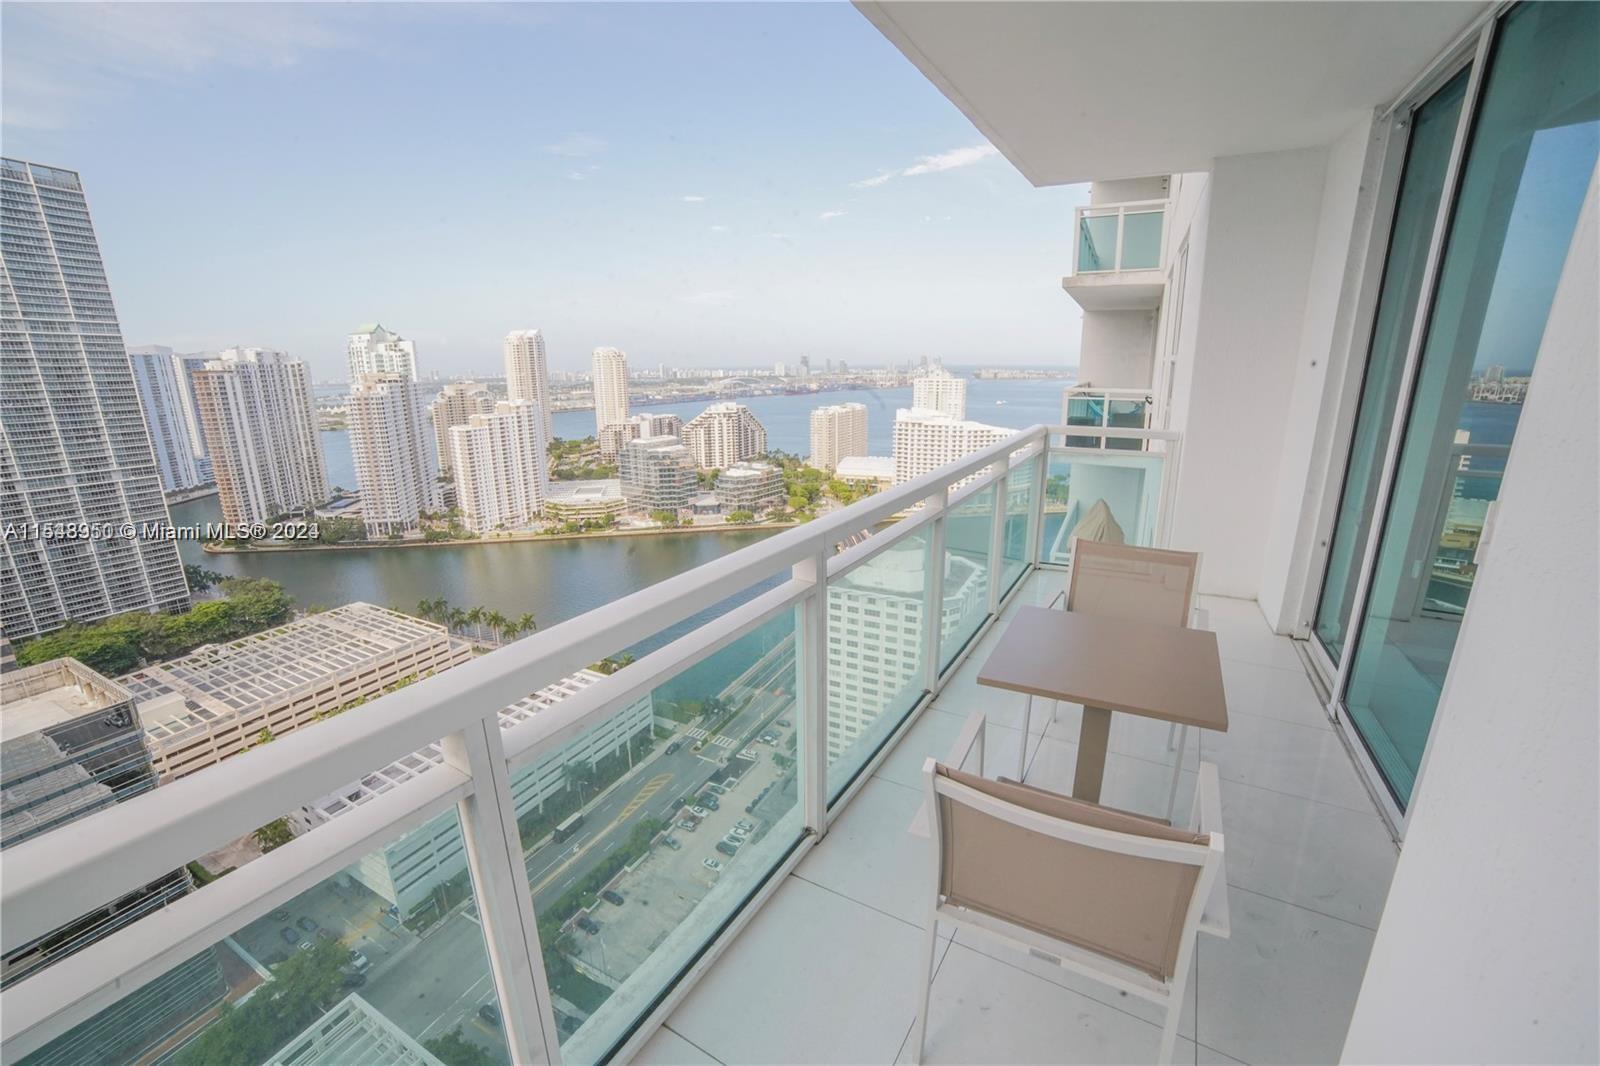 BEAUTIFUL  APARTMENT IN THE HEART OF BRICKELL...PANORAMIC WATER AND CITY VIEW...VERY BRIGHT AND COZY, PLENTY OF NATURAL LIGHT...EUROPEAN STYLE KITCHEN, PLENTY OF CABINETRY, STAINLESS STEEL APPLIANCES...  LARGE WALK IN CLOSETS IN EACH BEDROOM . MURPHY BED IN THE SECOND BEDROOM/OFFICE. ...AMENITIES SUCH AS SWIMMING POOL, FITNESS CENTER, SPA, BUSINESS CENTER AND MUCH MORE...FURNITURE NEGOTIABLE...